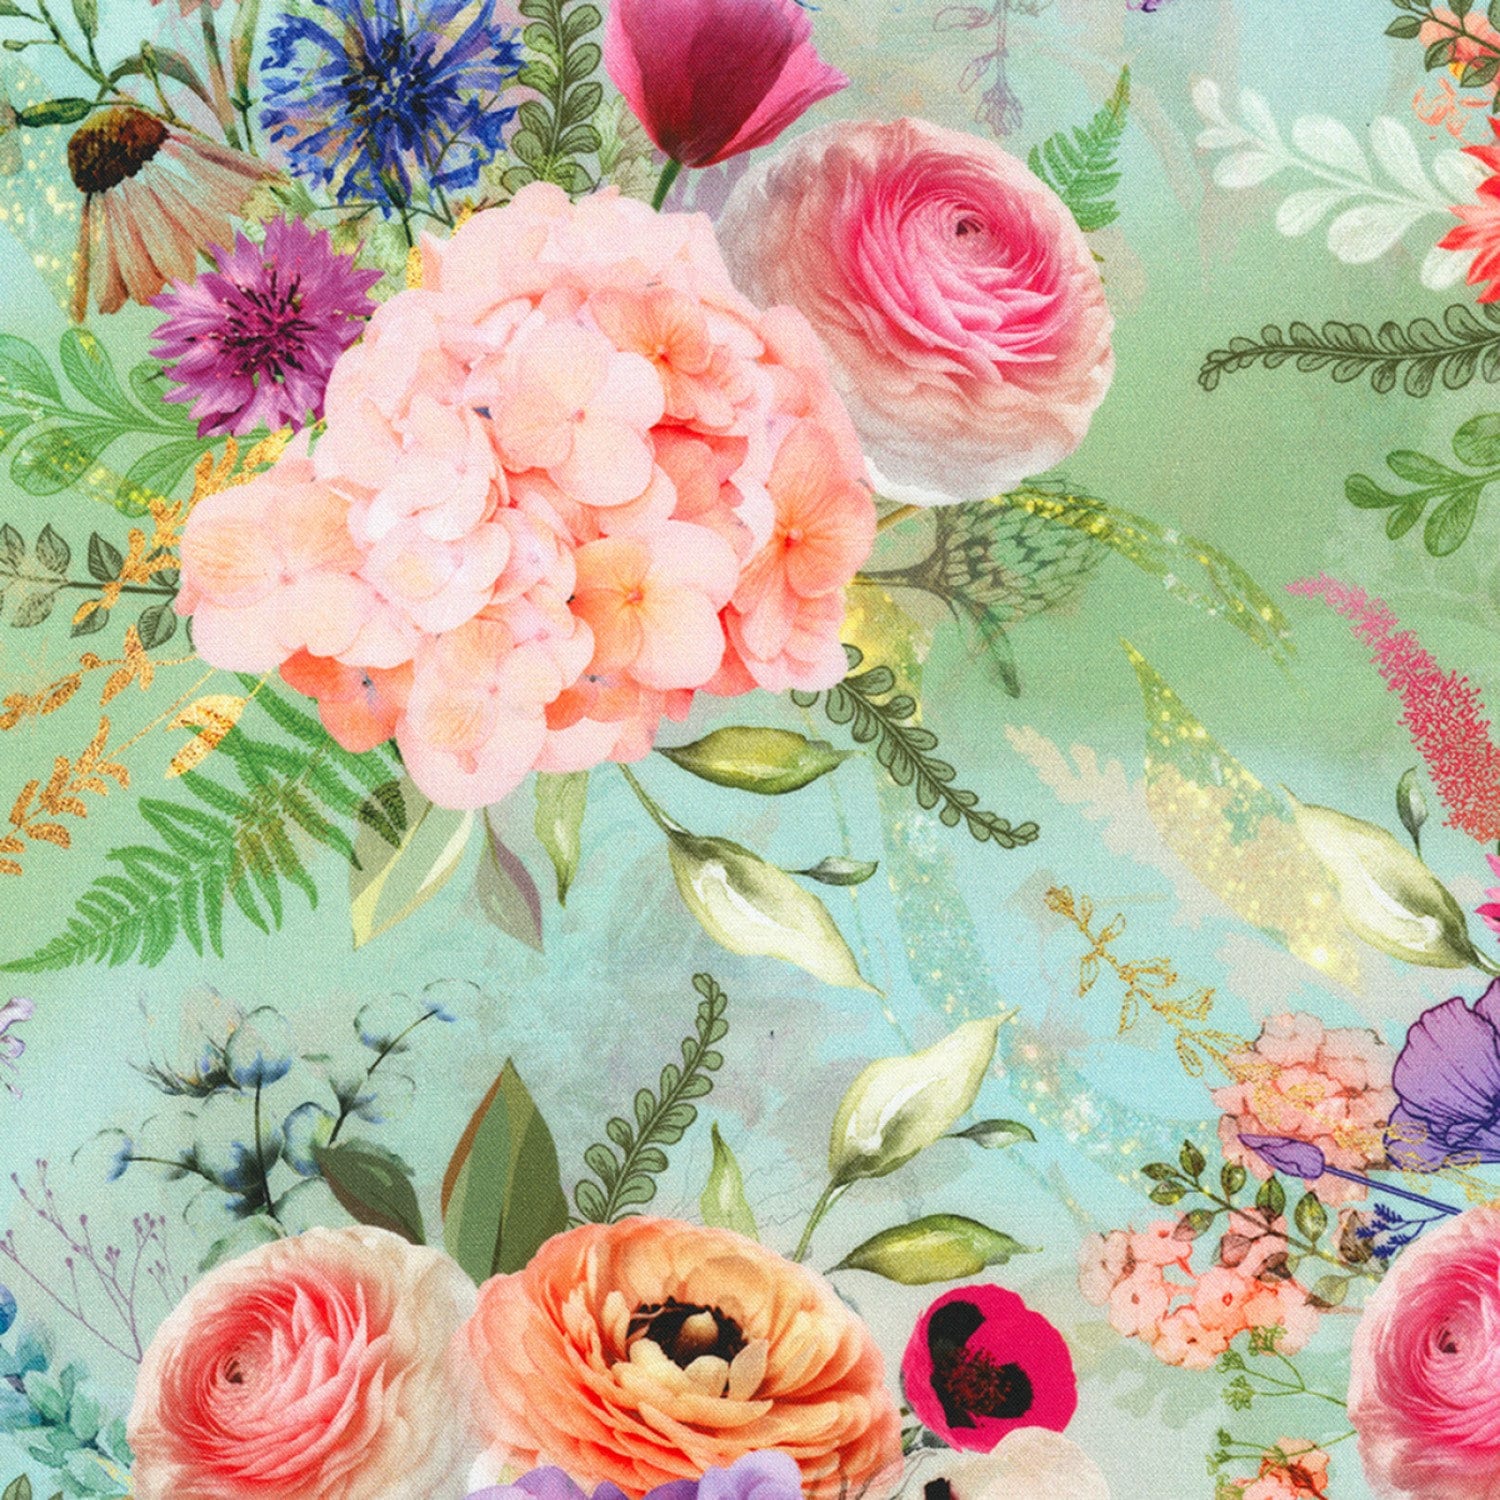 Misty Garden Charm Squares, Robert Kaufman CHS-1208-42, Digitally Printed Floral Quilt Fabric, 5" Inch Precut Fabric Squares